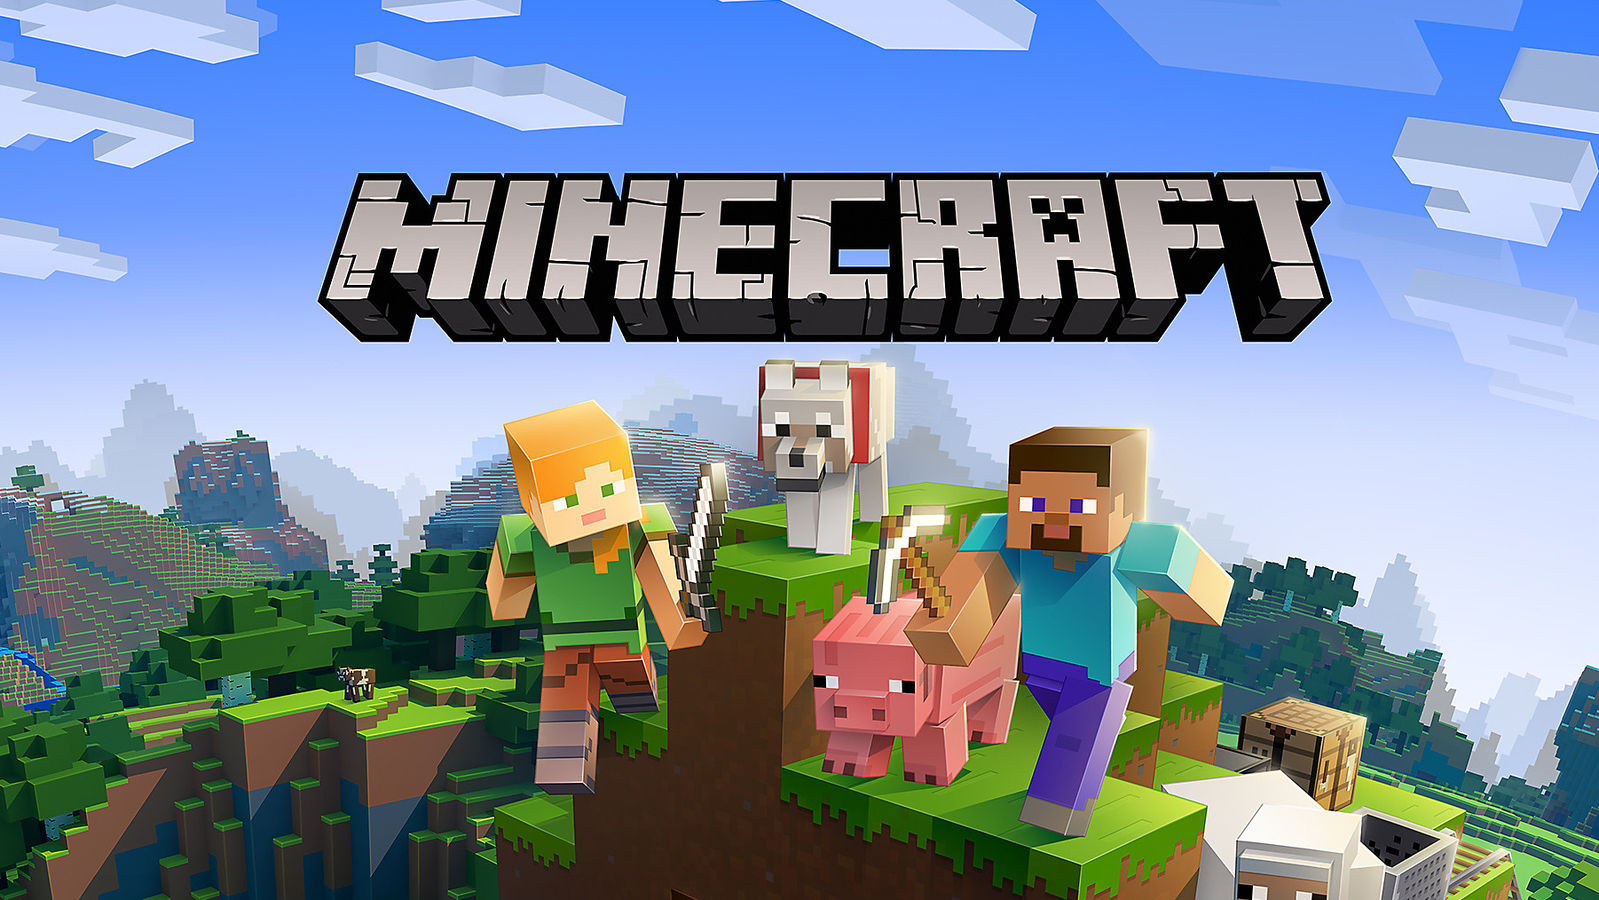 When will Minecraft 1.17 Caves & Cliffs Update be available for download:  Expected release date, features, and more